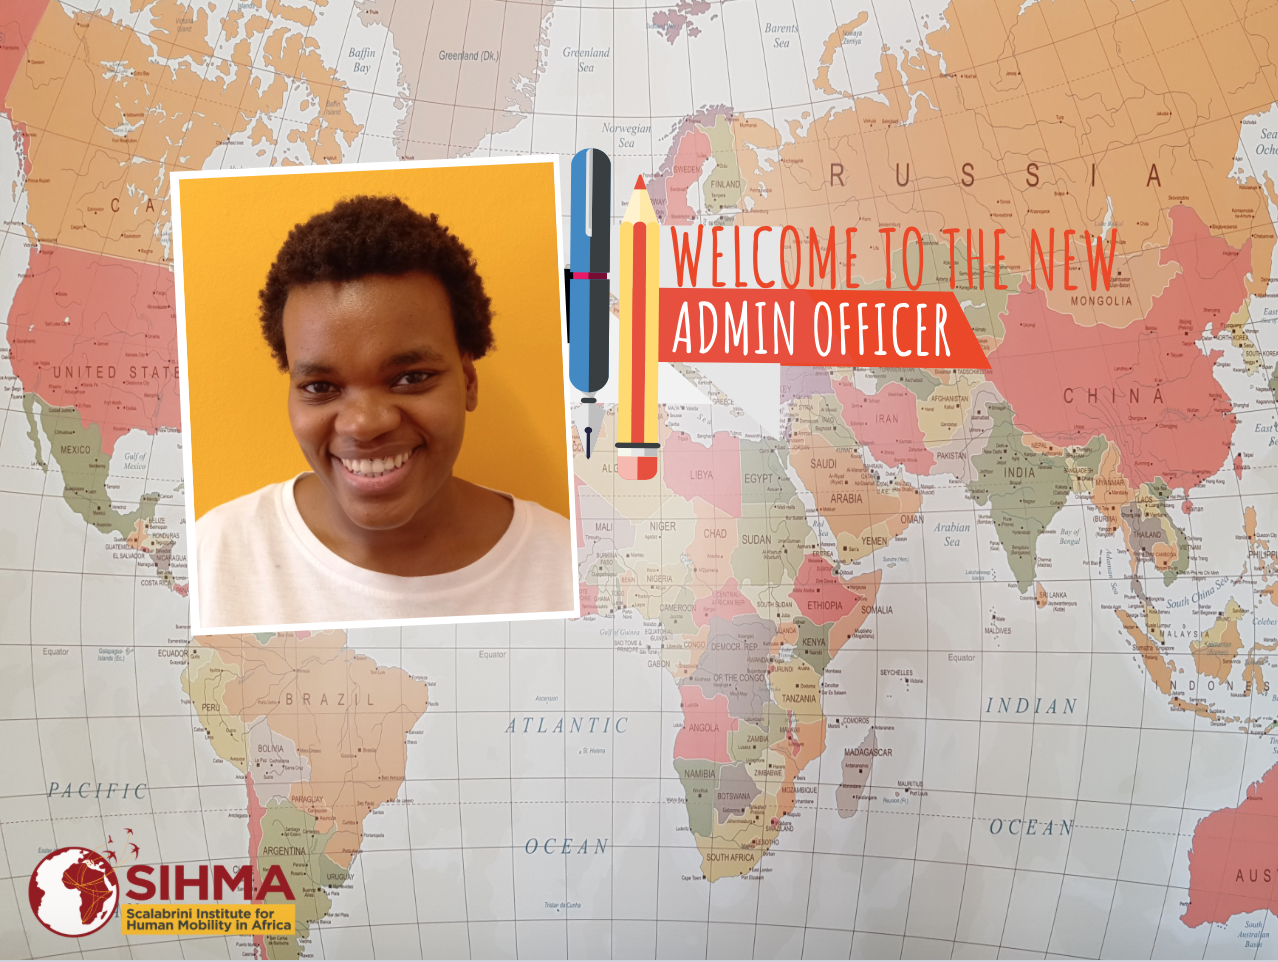 https://www.sihma.org.za/photos/shares/Welcome to Samantha.png